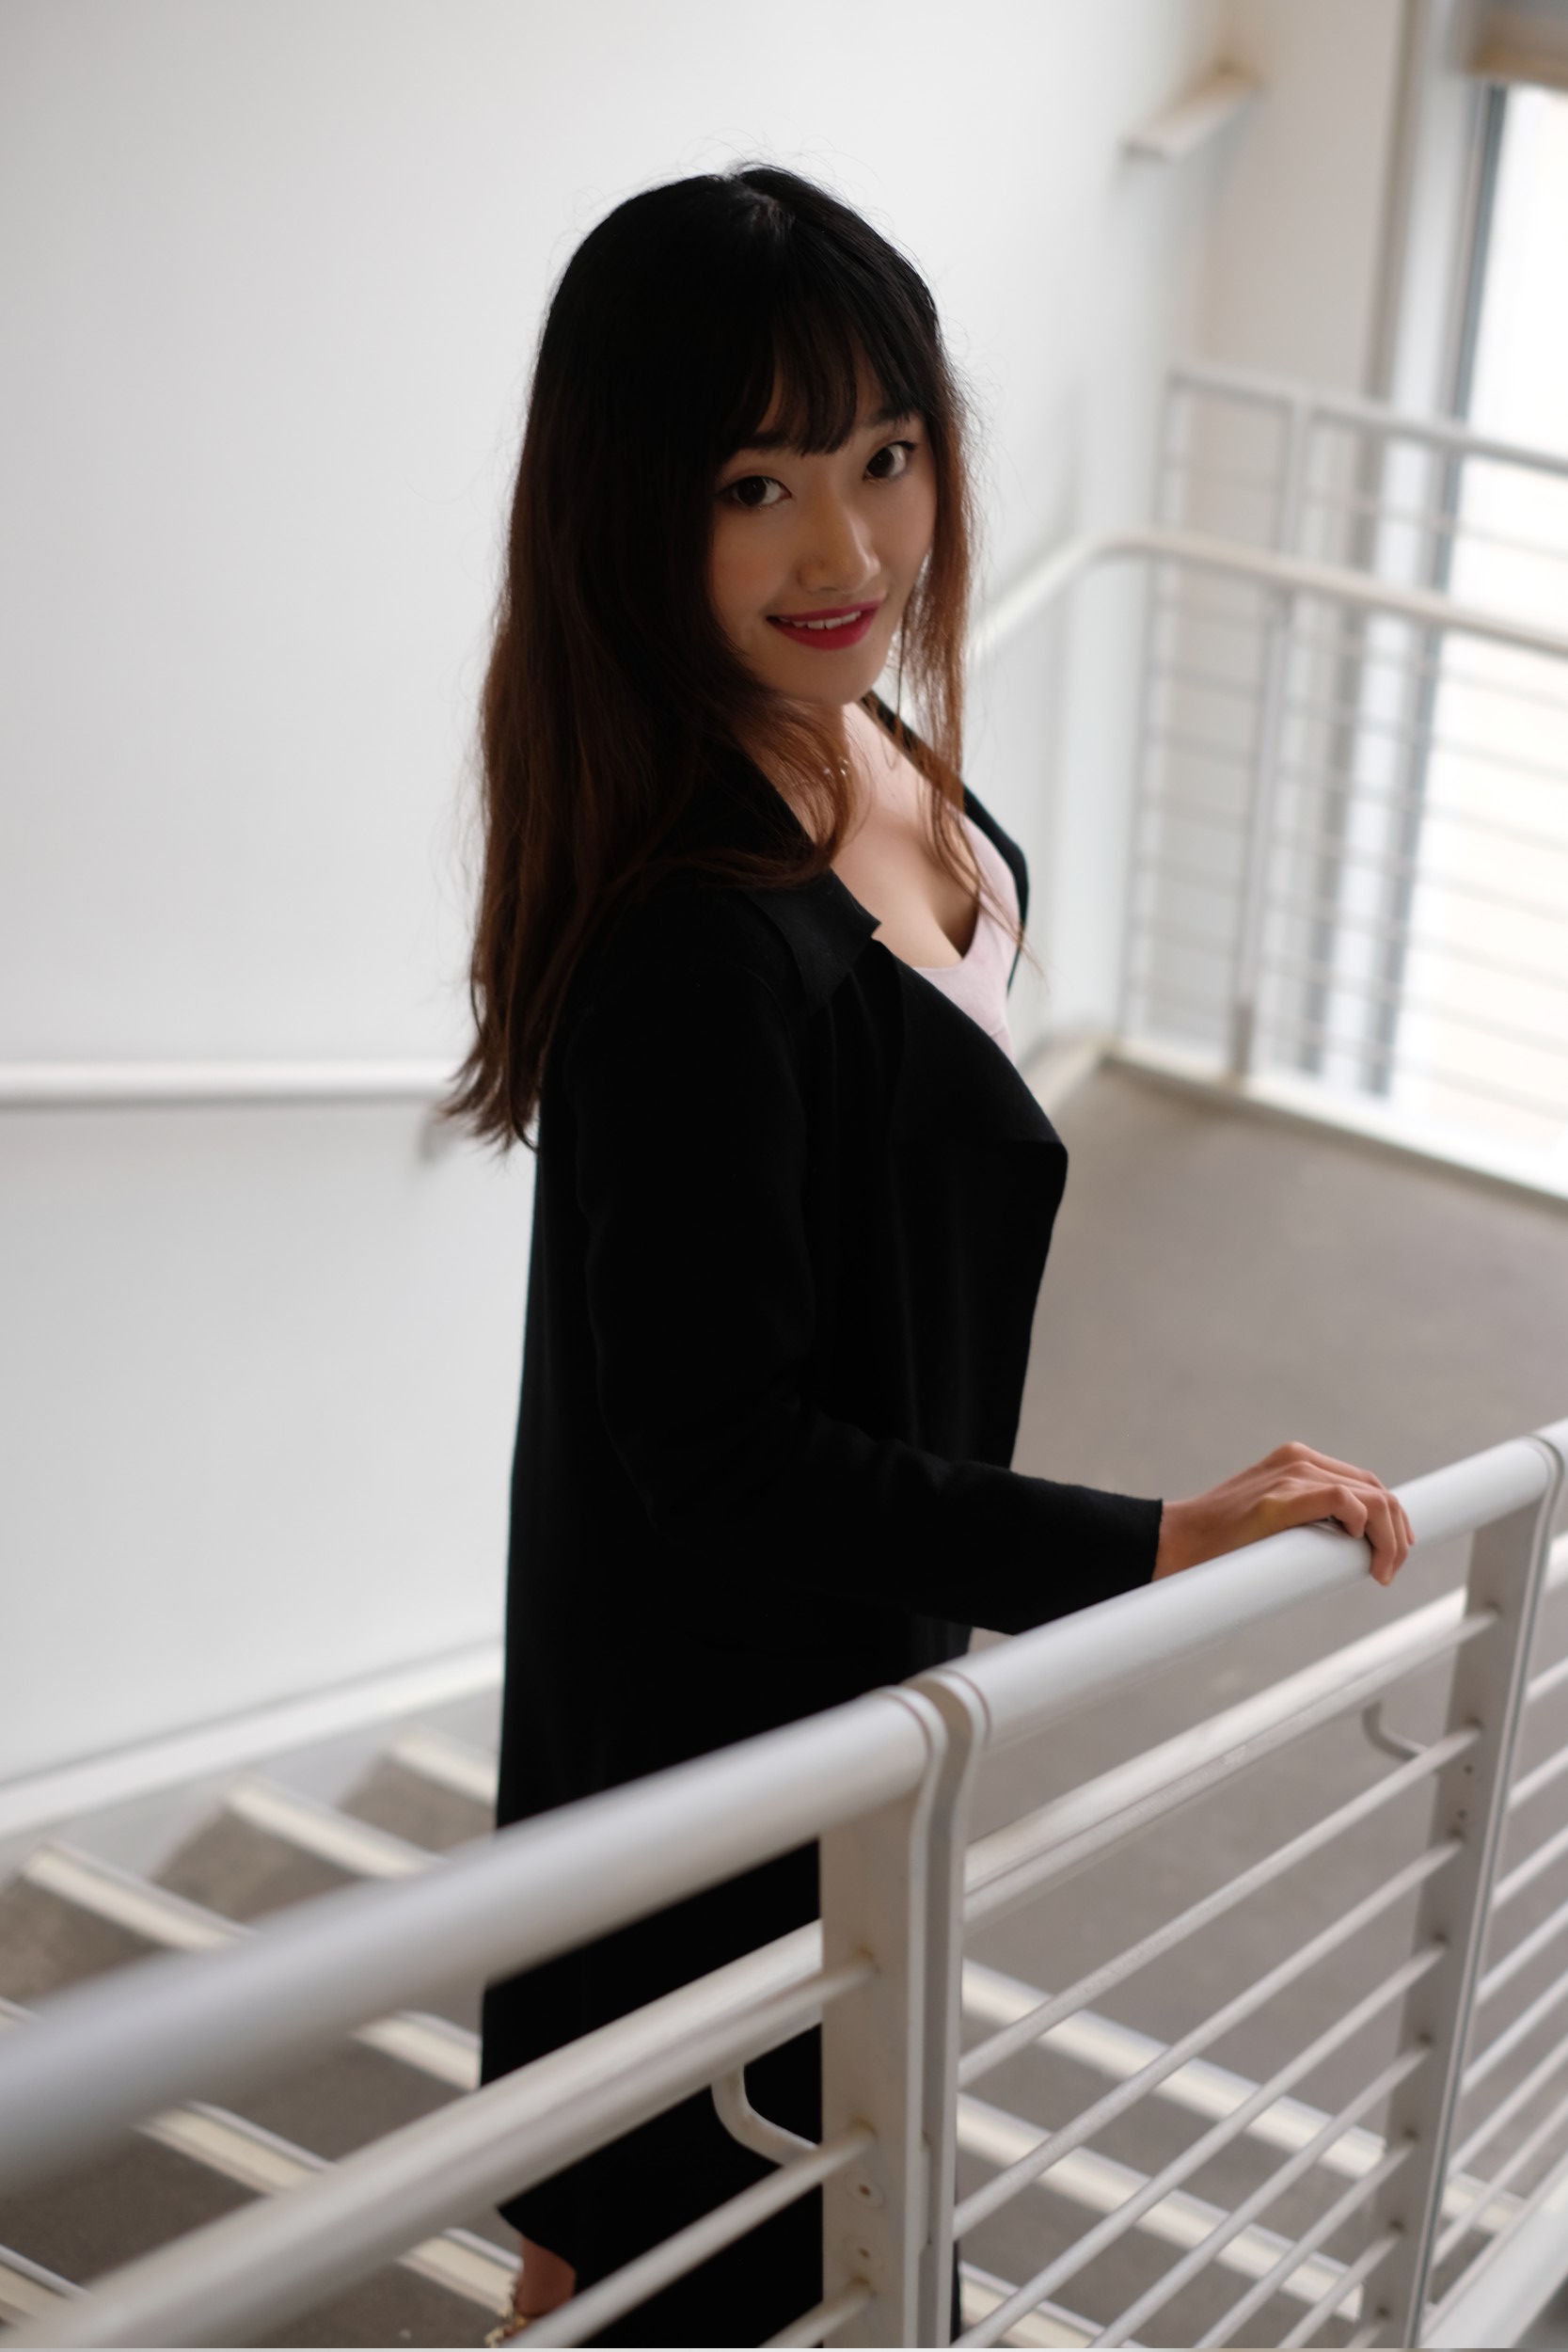 Chinese girl in black coat in stairwell